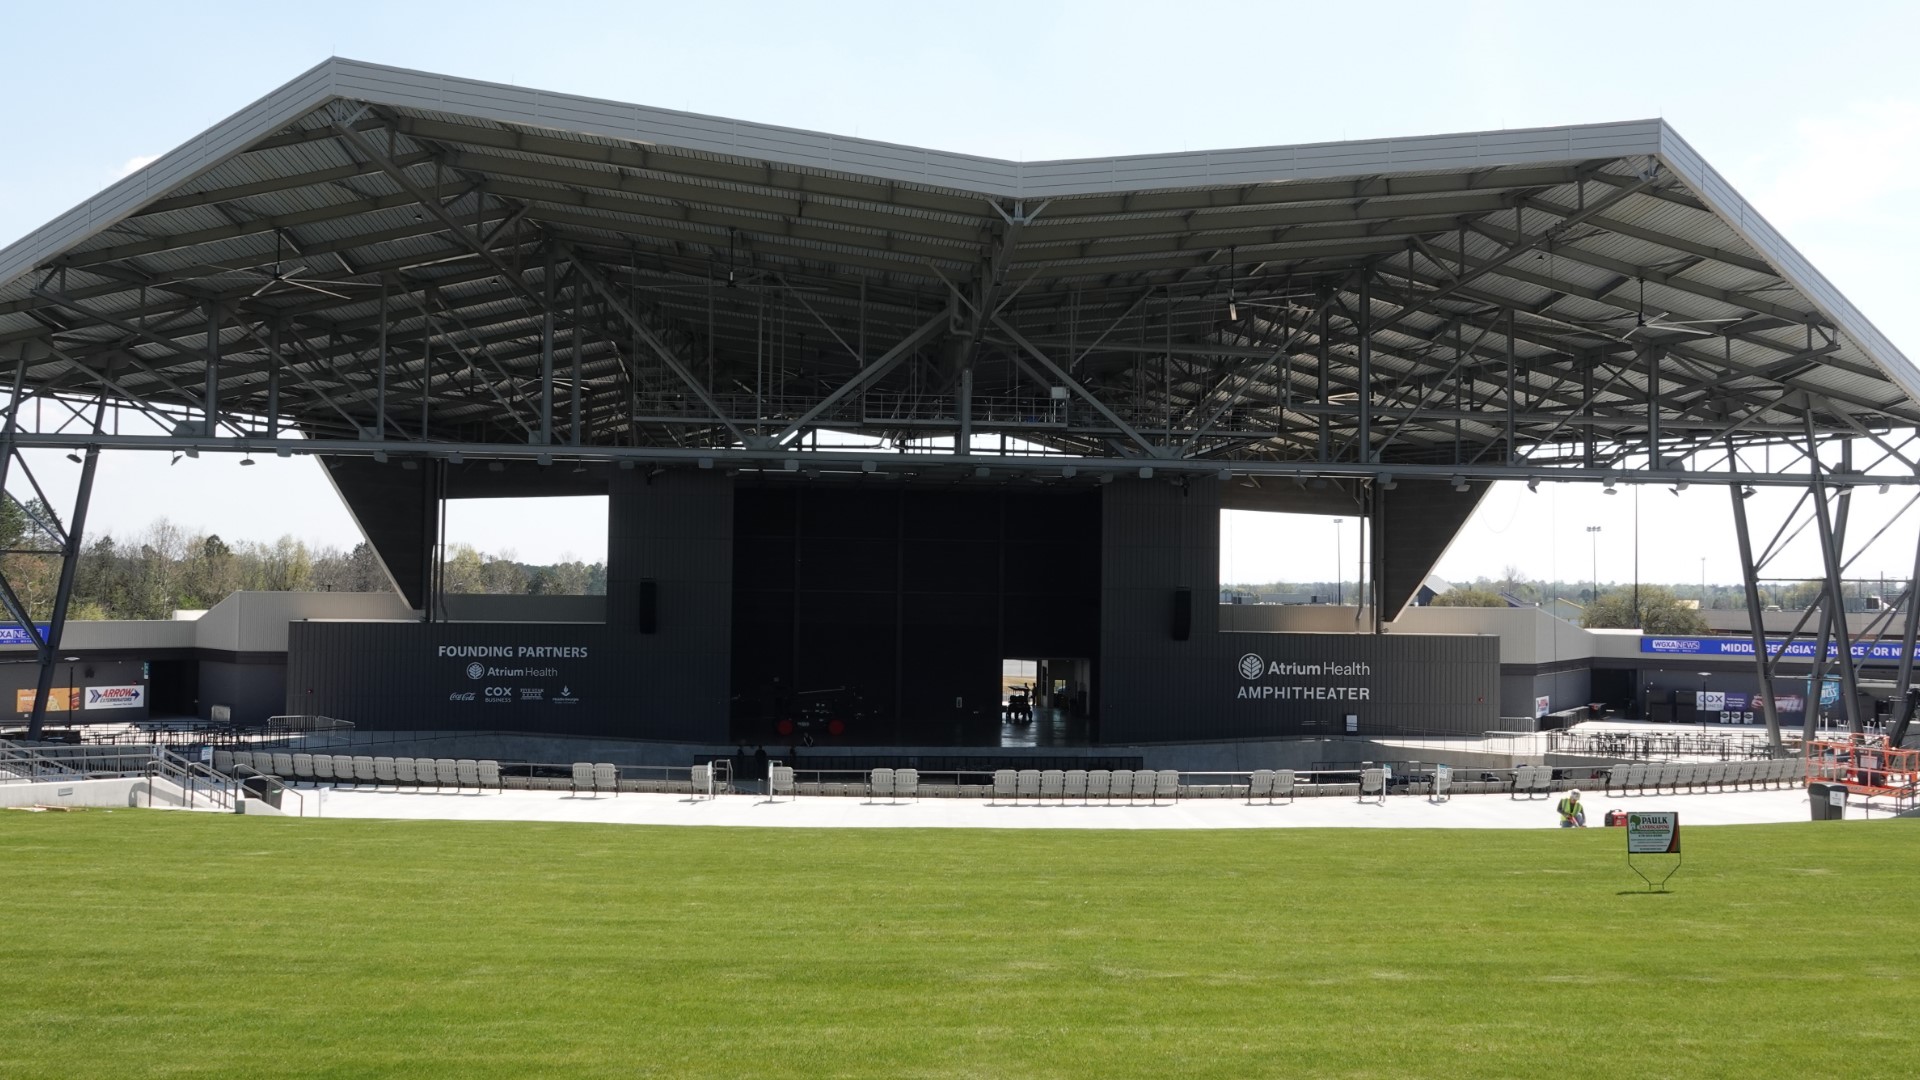 The venue's debut comes on Sunday, where ZZ Top and Lynard Skynard are set to perform.